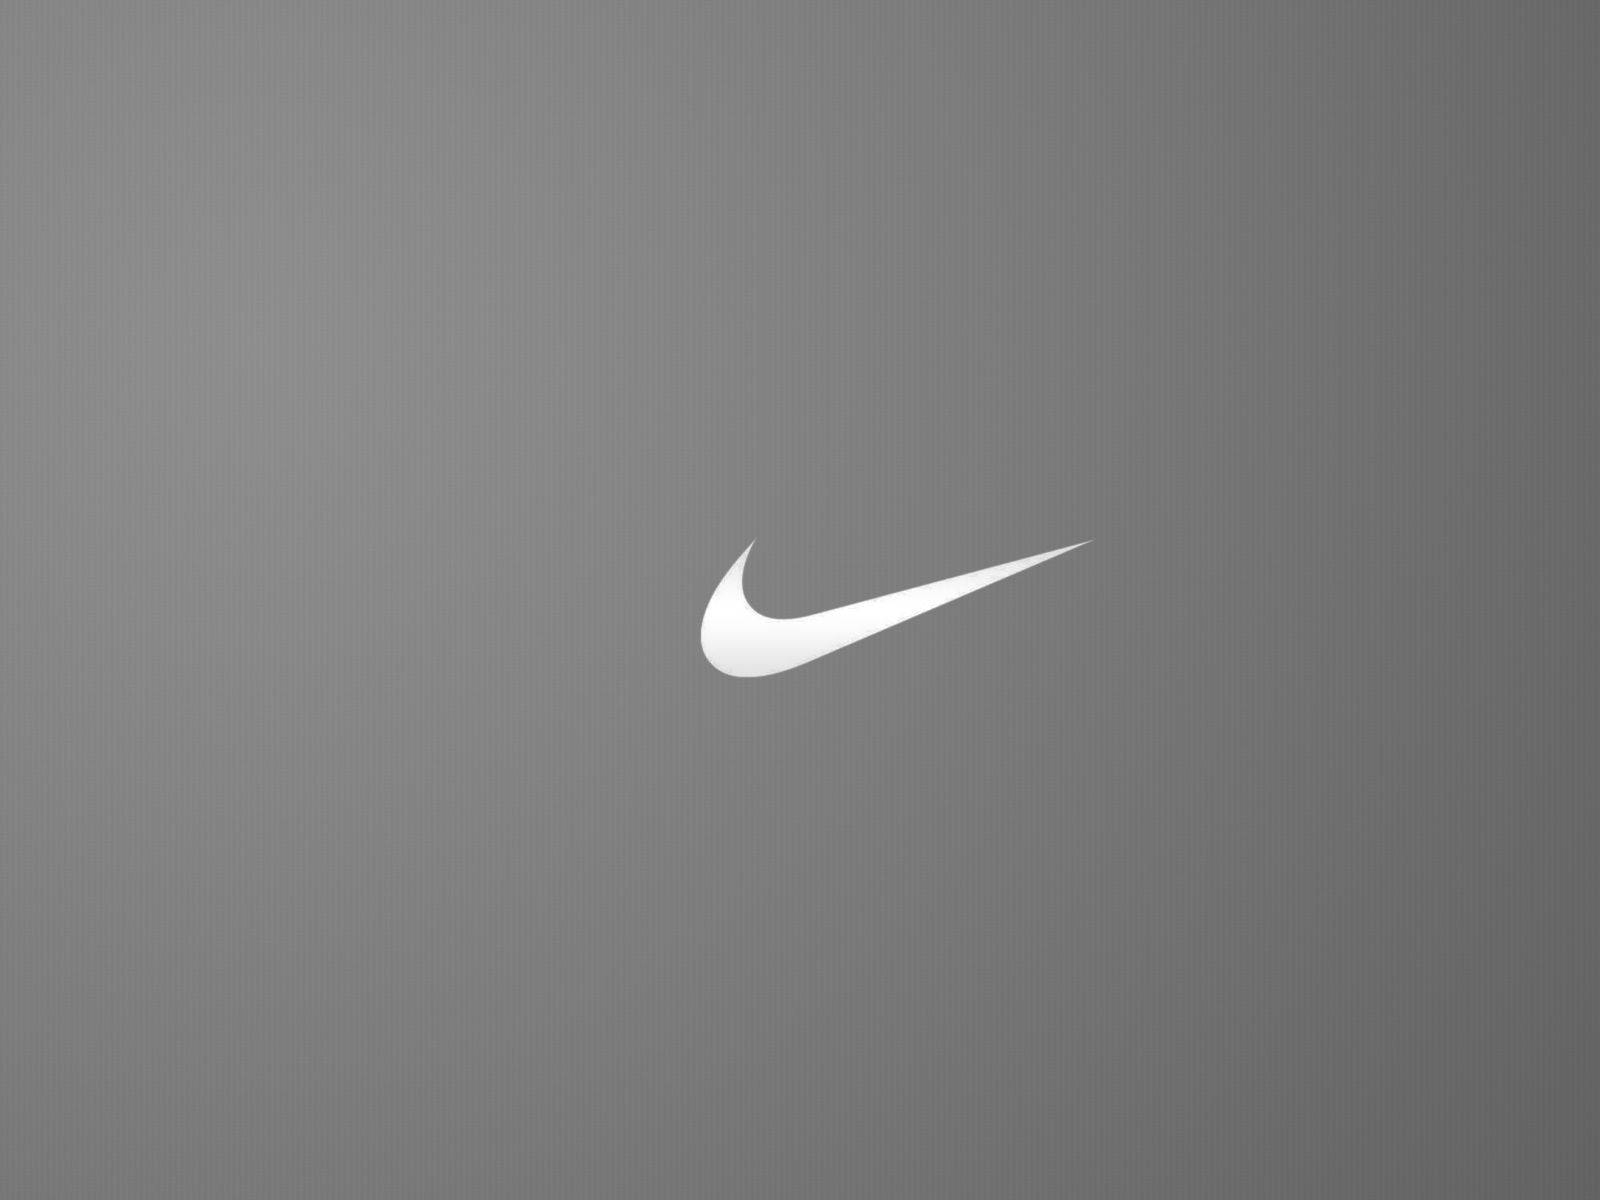 Nike 1600X1200 Wallpaper and Background Image